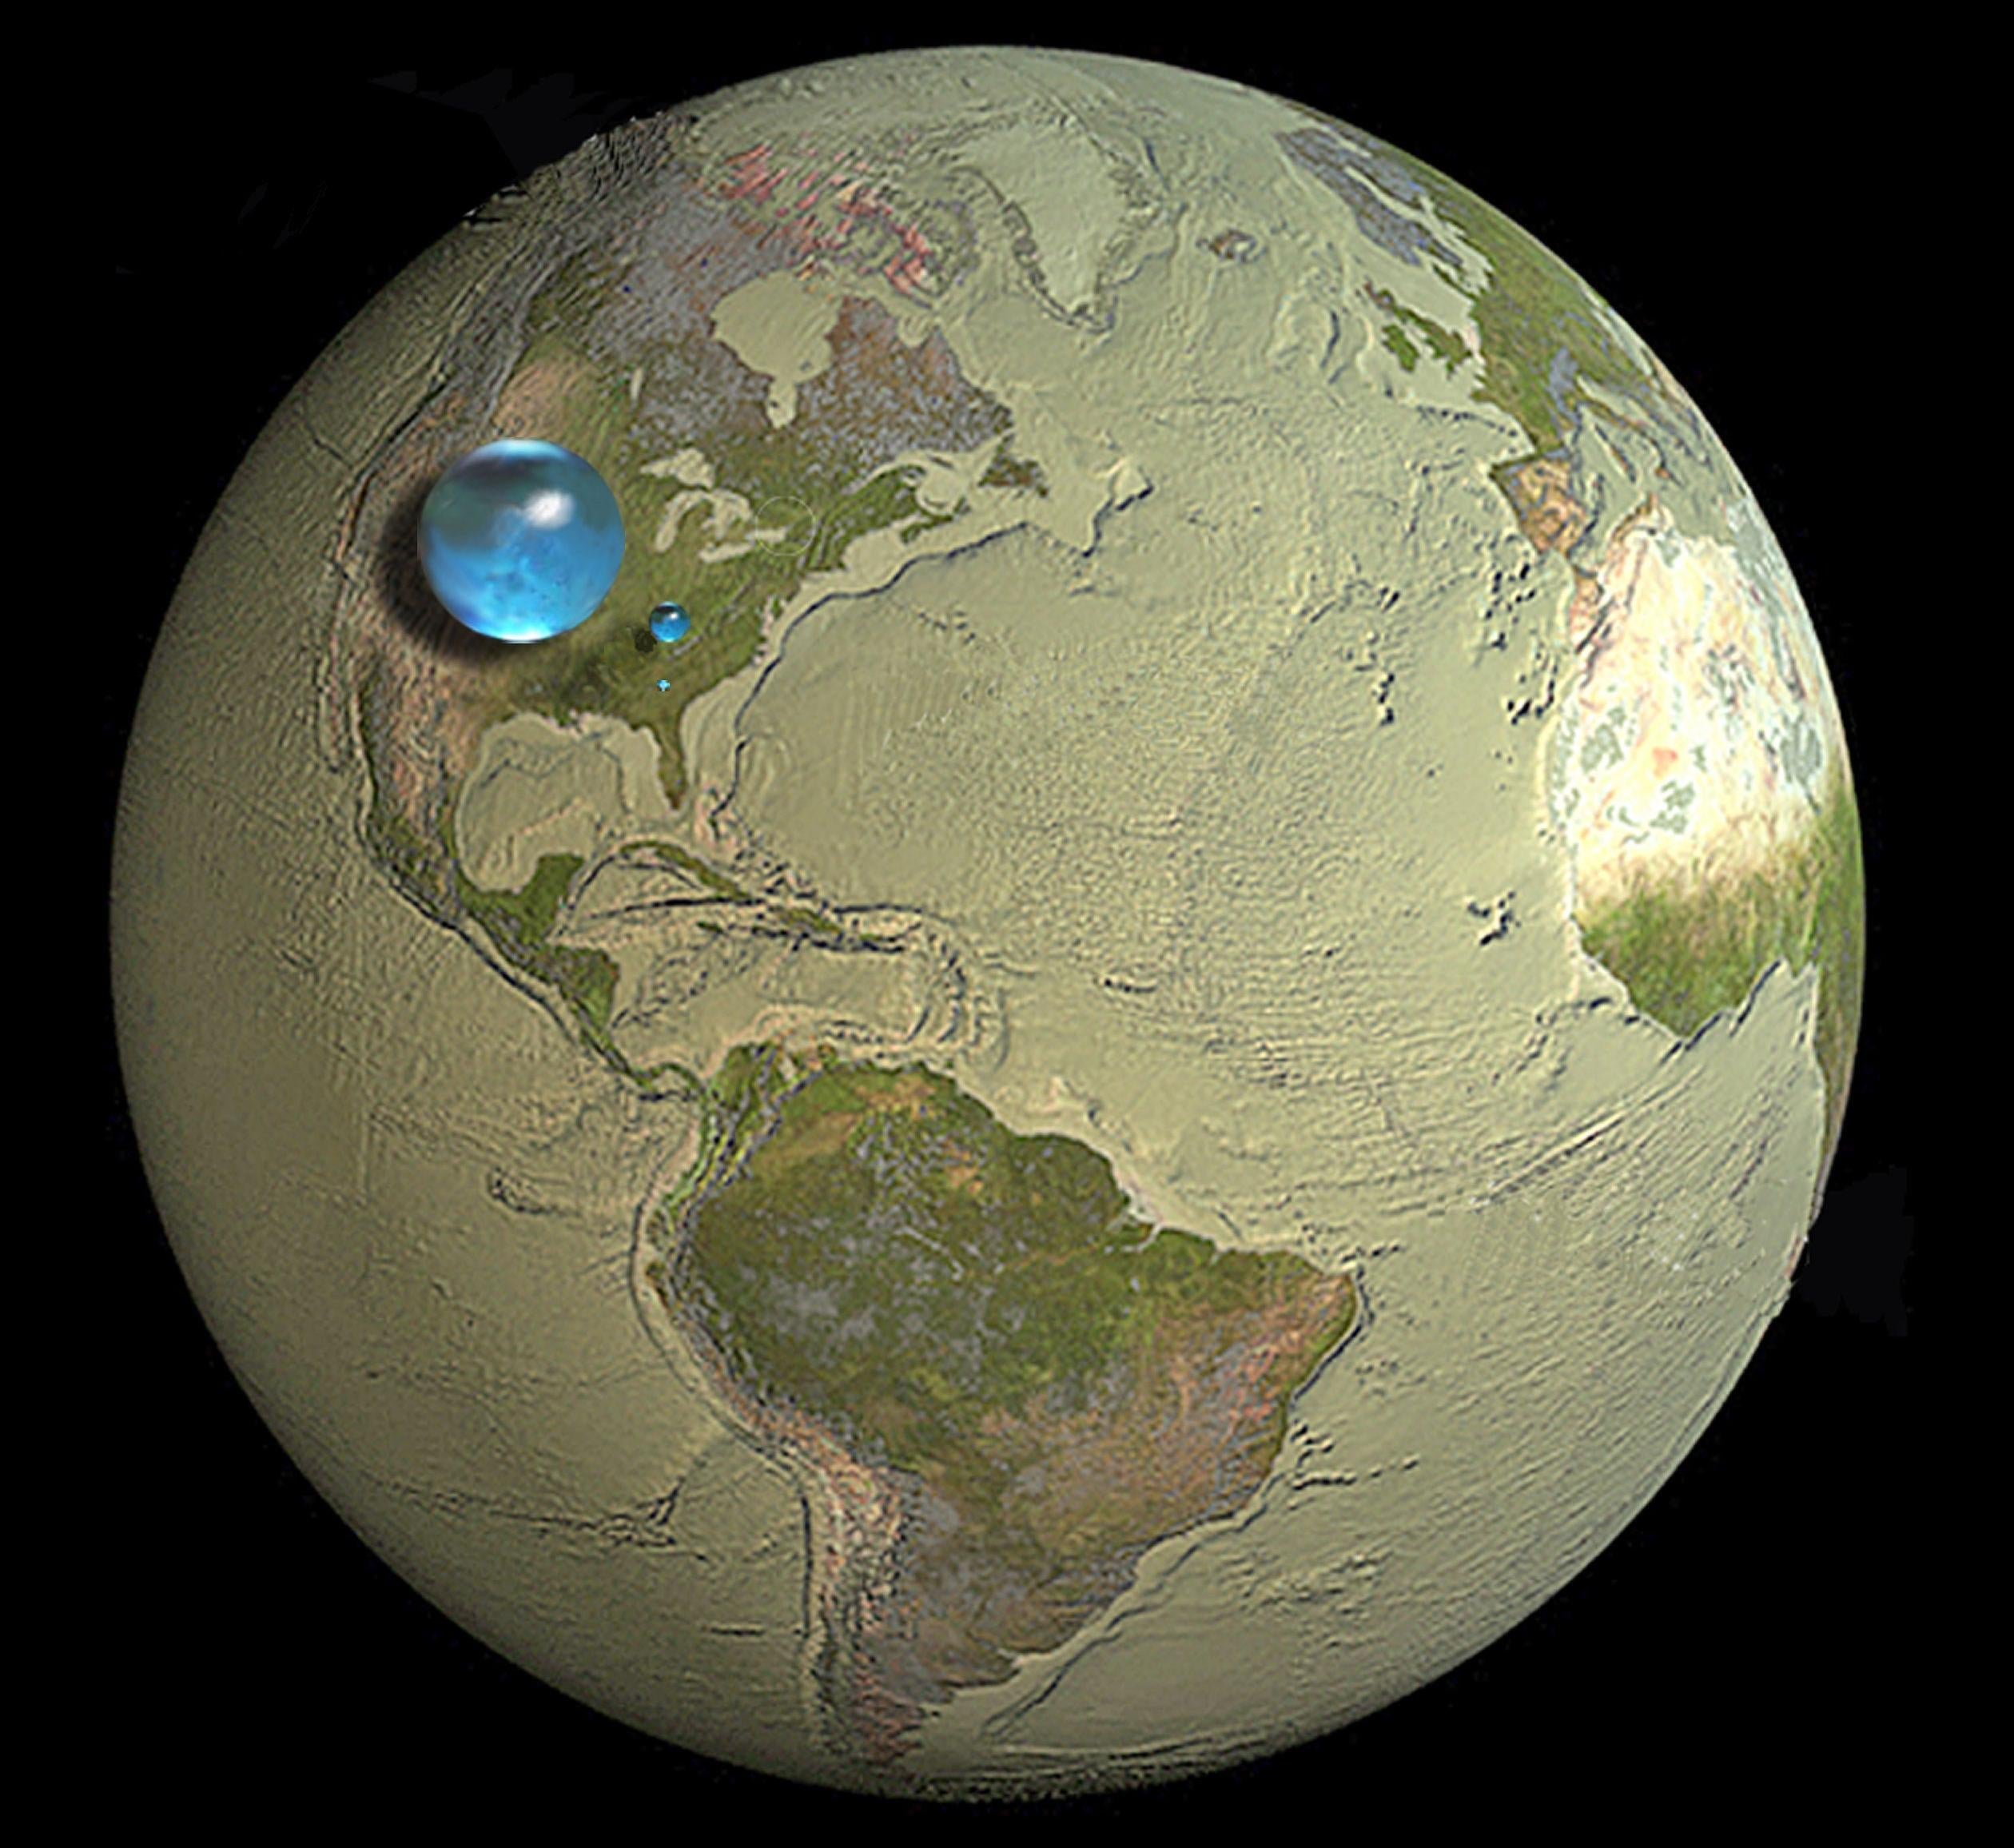 The world's water: The largest blue sphere represents the total volume of all water on Earth; the second largest represents all fresh liquid water in the ground, lakes, swamps, and rivers; and the smallest sphere represents freshwater in lakes and rivers only.  (Image: USGS)